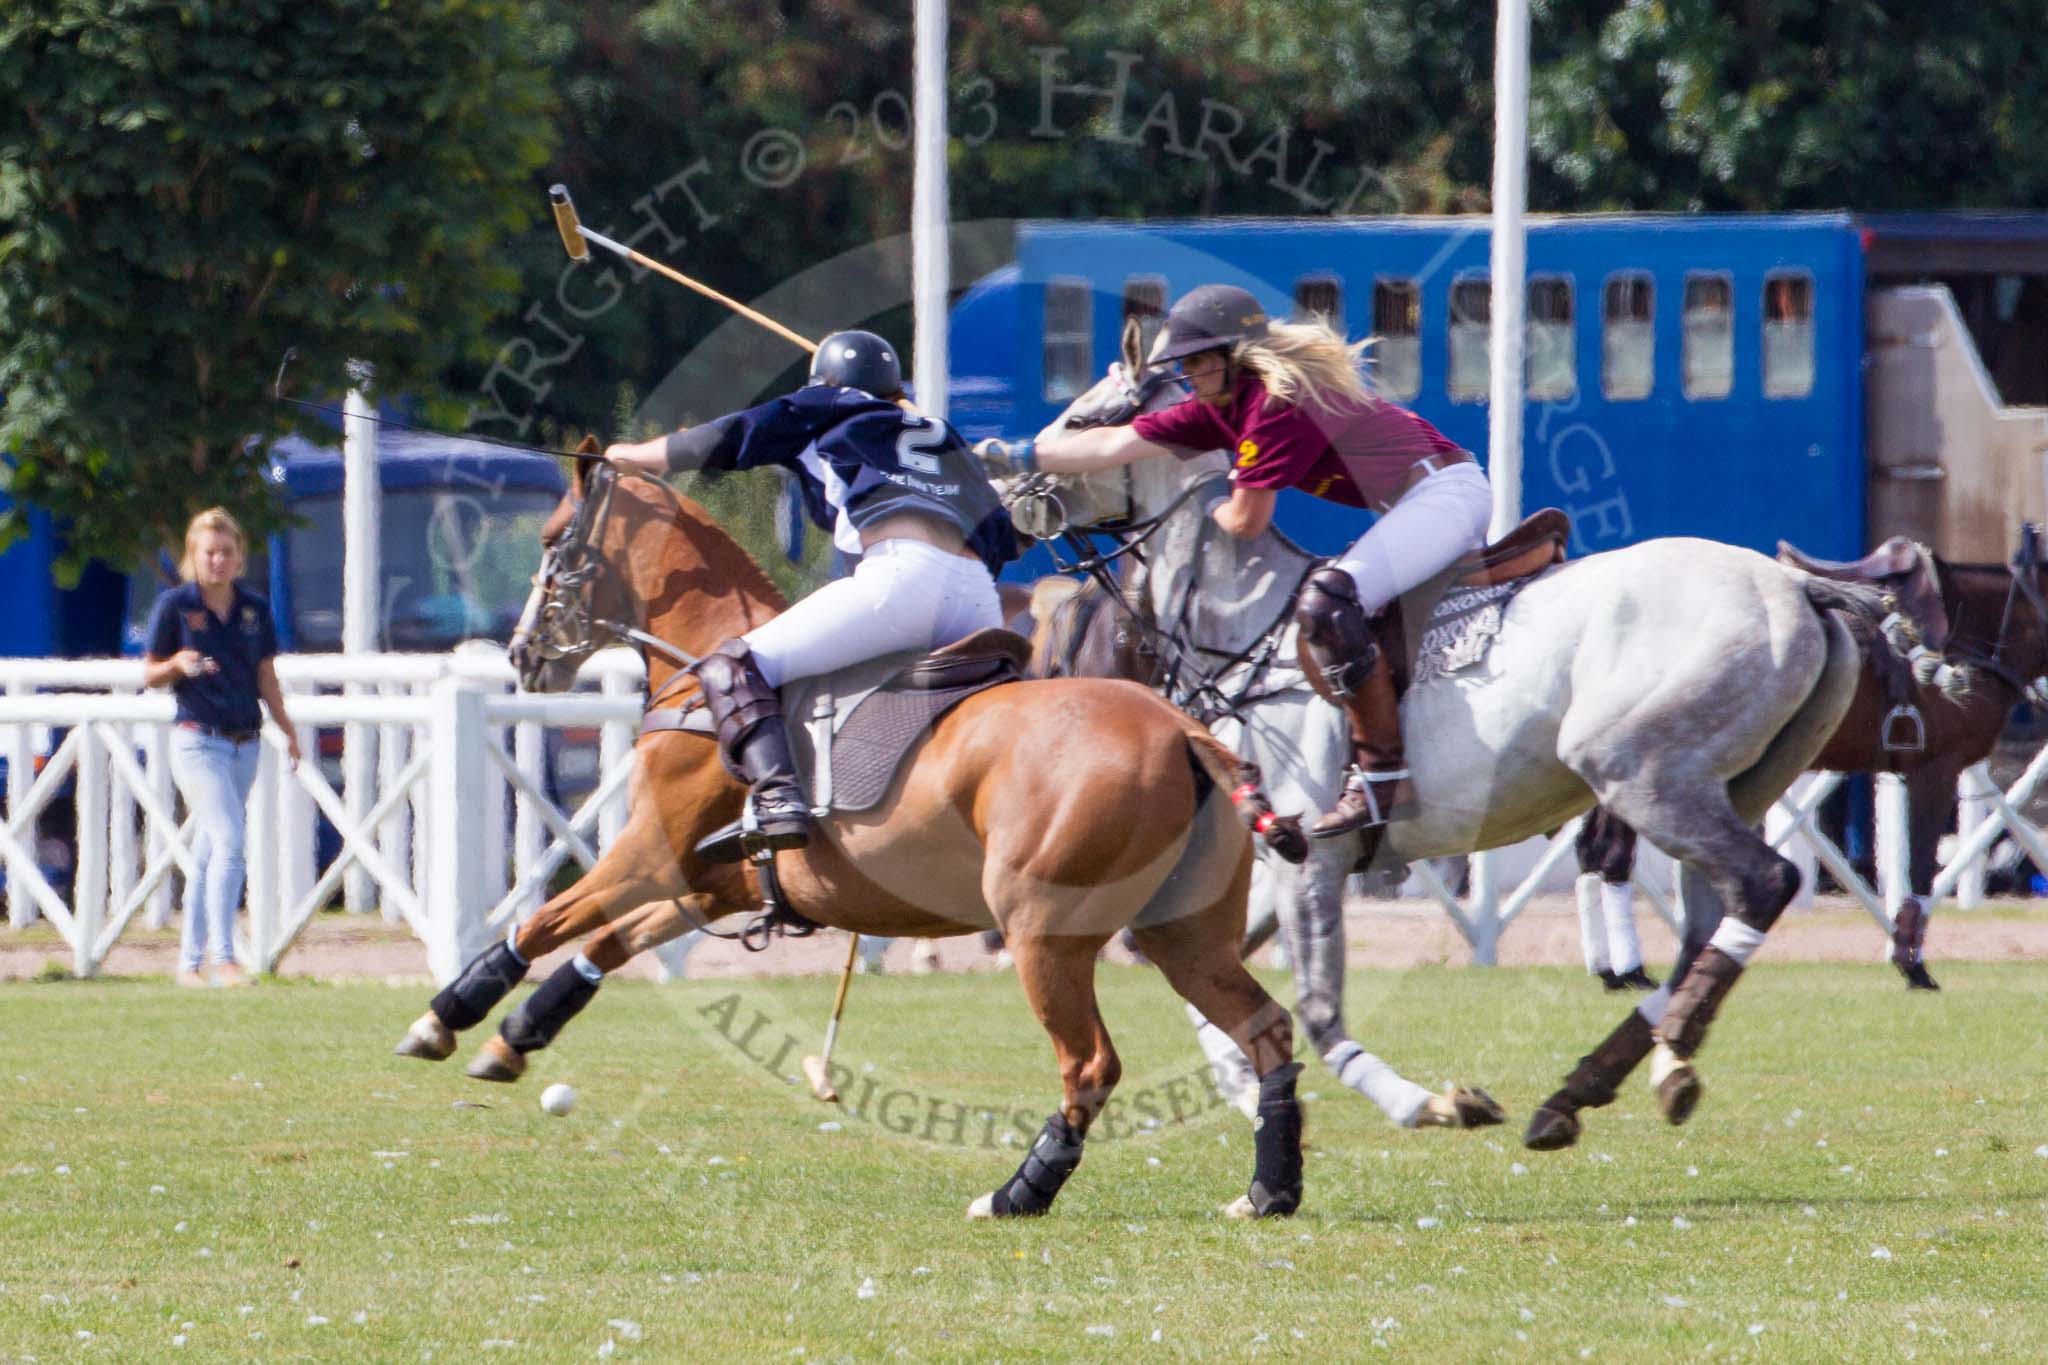 DBPC Polo in the Park 2013, Final of the Amaranther Trophy (0 Goal), Bucking Broncos vs The Inn Team.
Dallas Burston Polo Club, ,
Southam,
Warwickshire,
United Kingdom,
on 01 September 2013 at 11:52, image #135